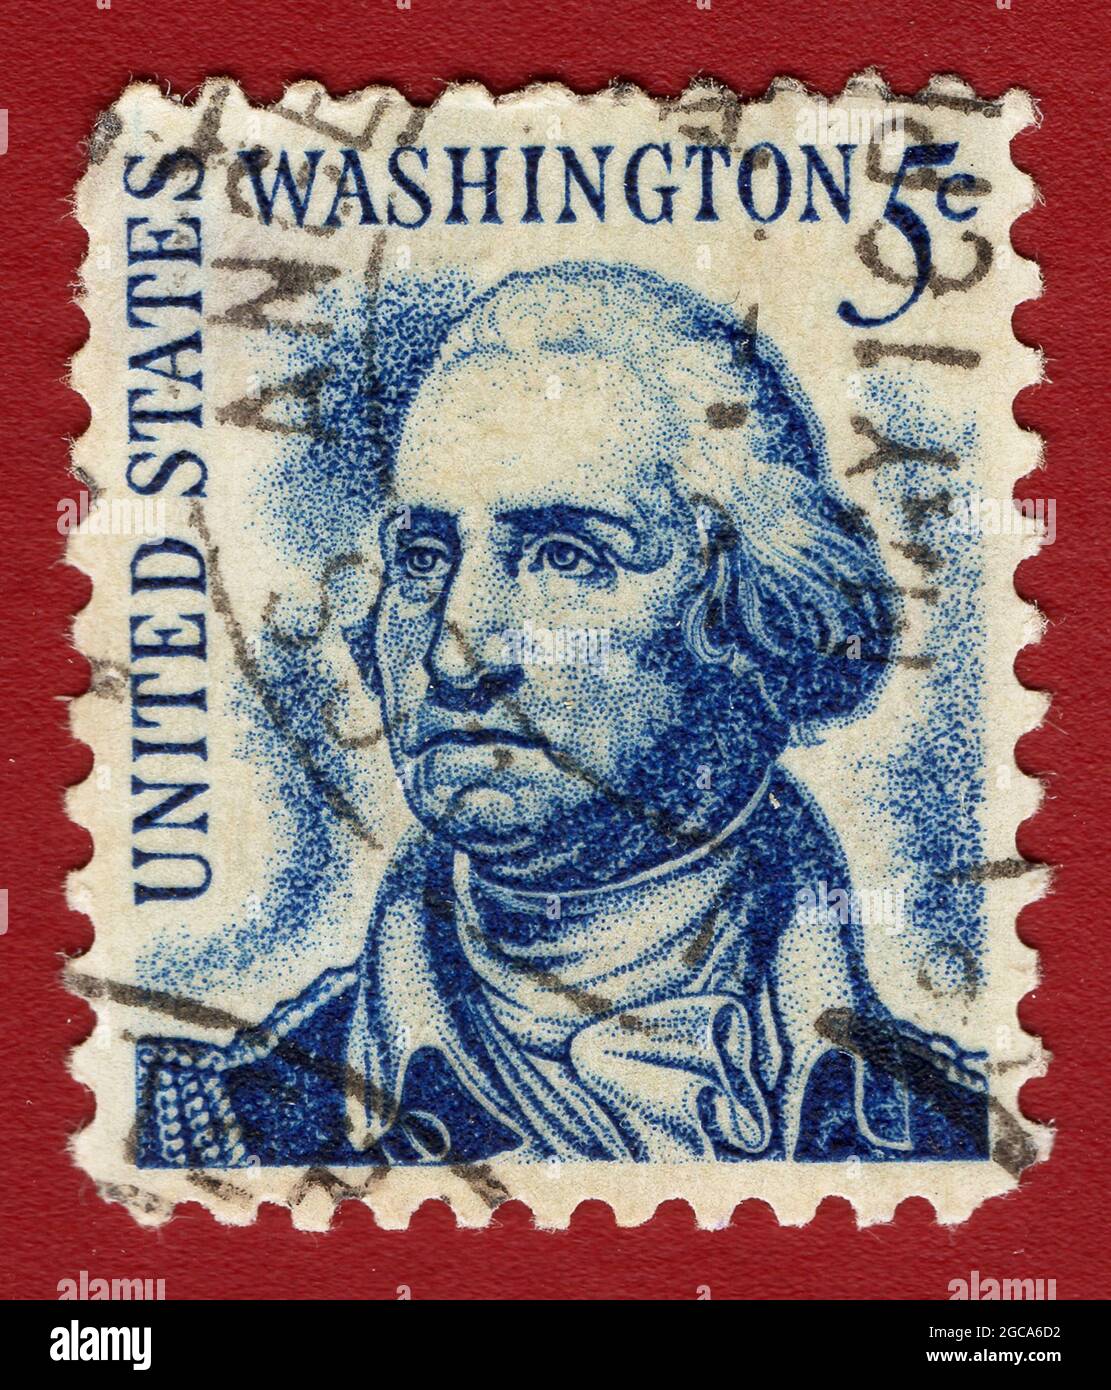 USA-CIRCA 1966: A postage stamp shows image portrait of George Washington the 1st President of the United States of America, circa 1966. Stock Photo